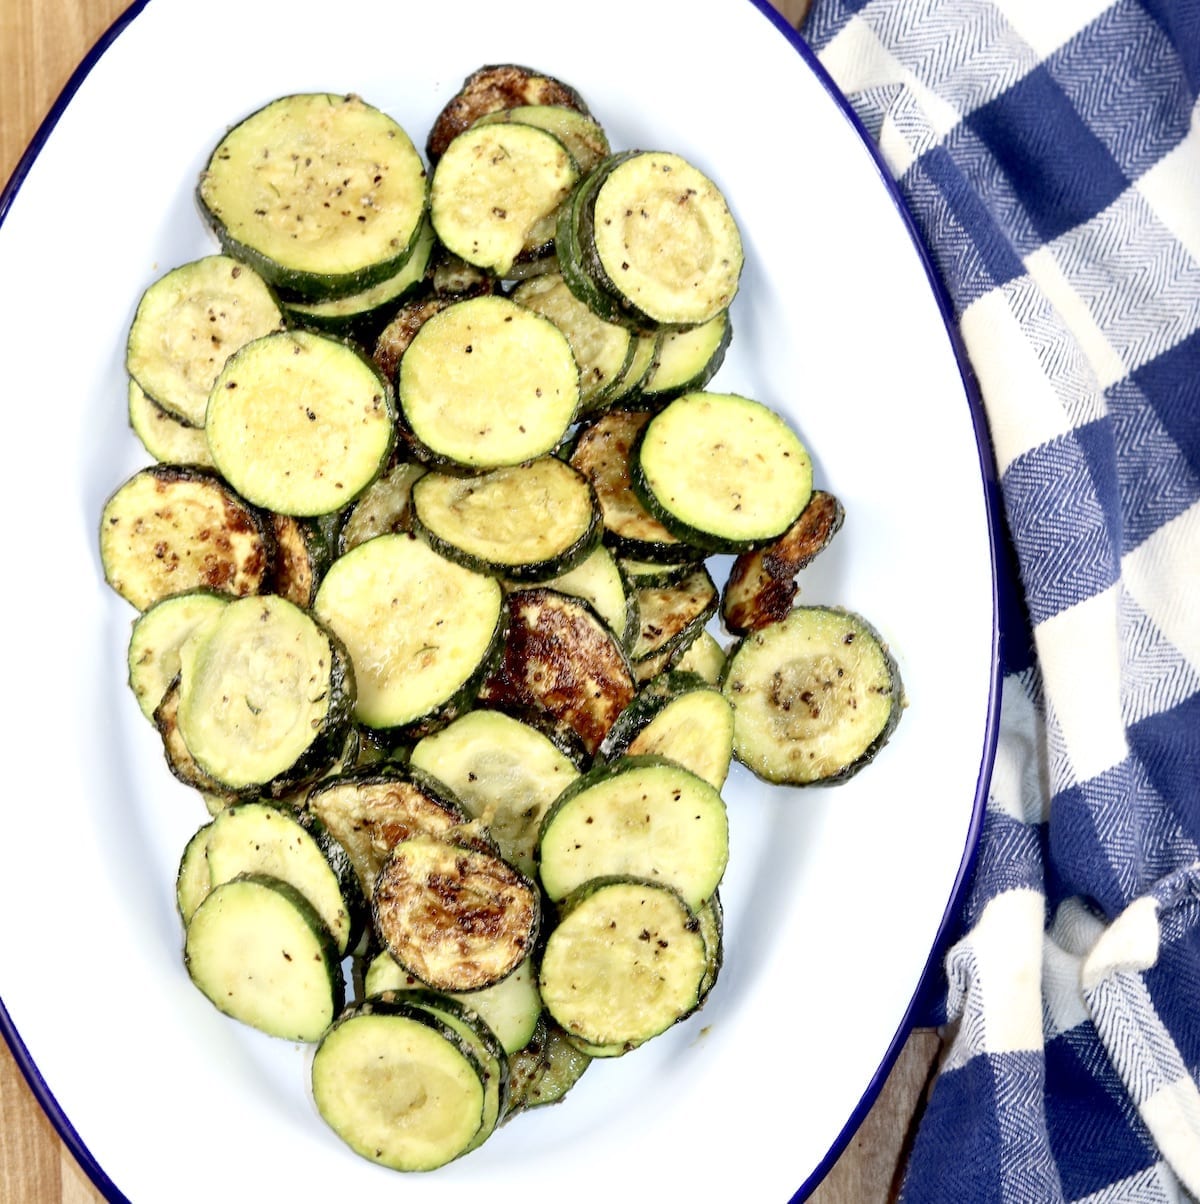 Grilled Zucchini on a white oval platter - blue napkin on side